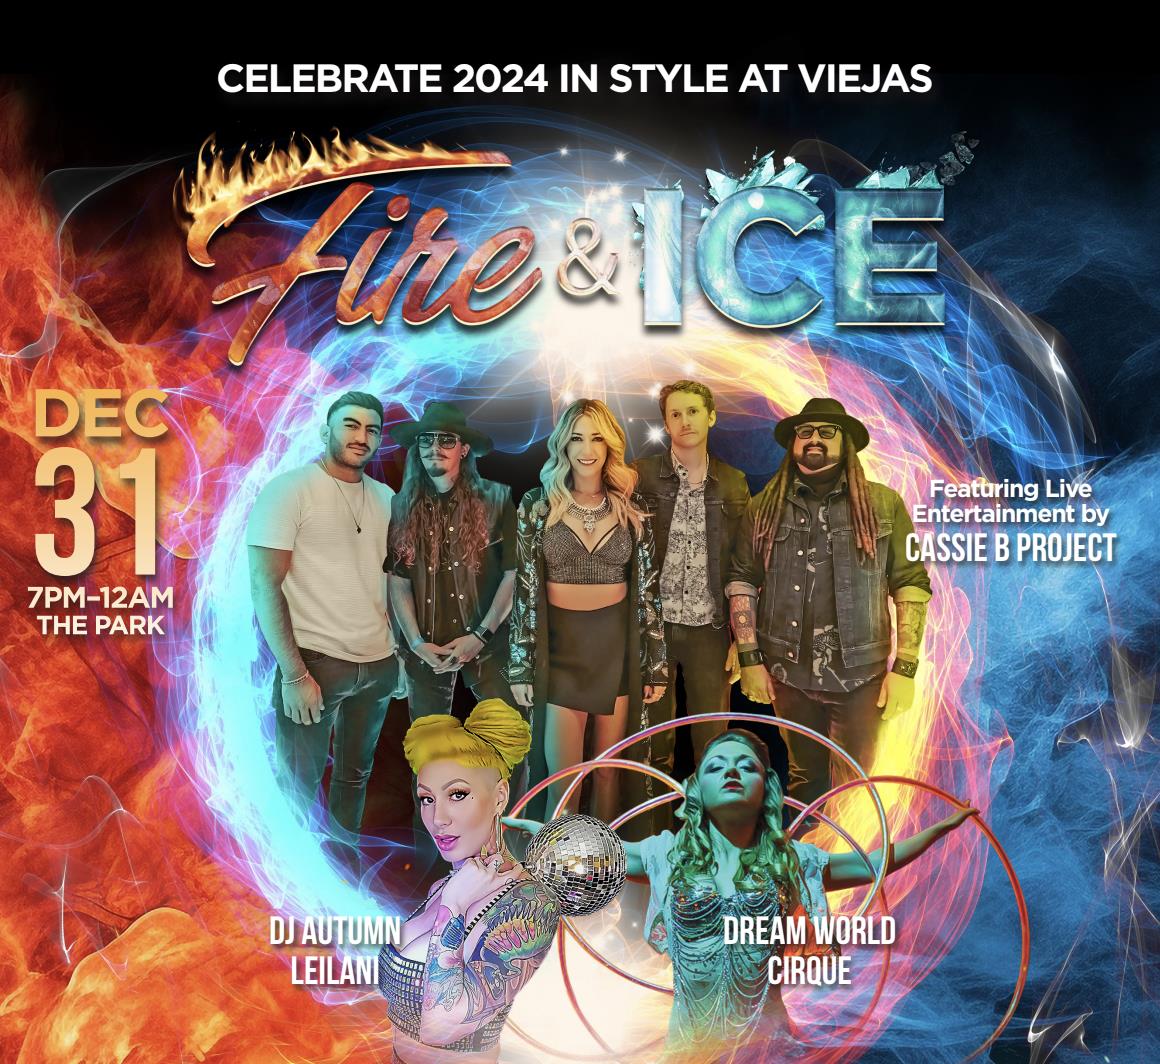 Buy Tickets to Viejas Fire & Ice New Year's Eve Bash in Alpine on Dec